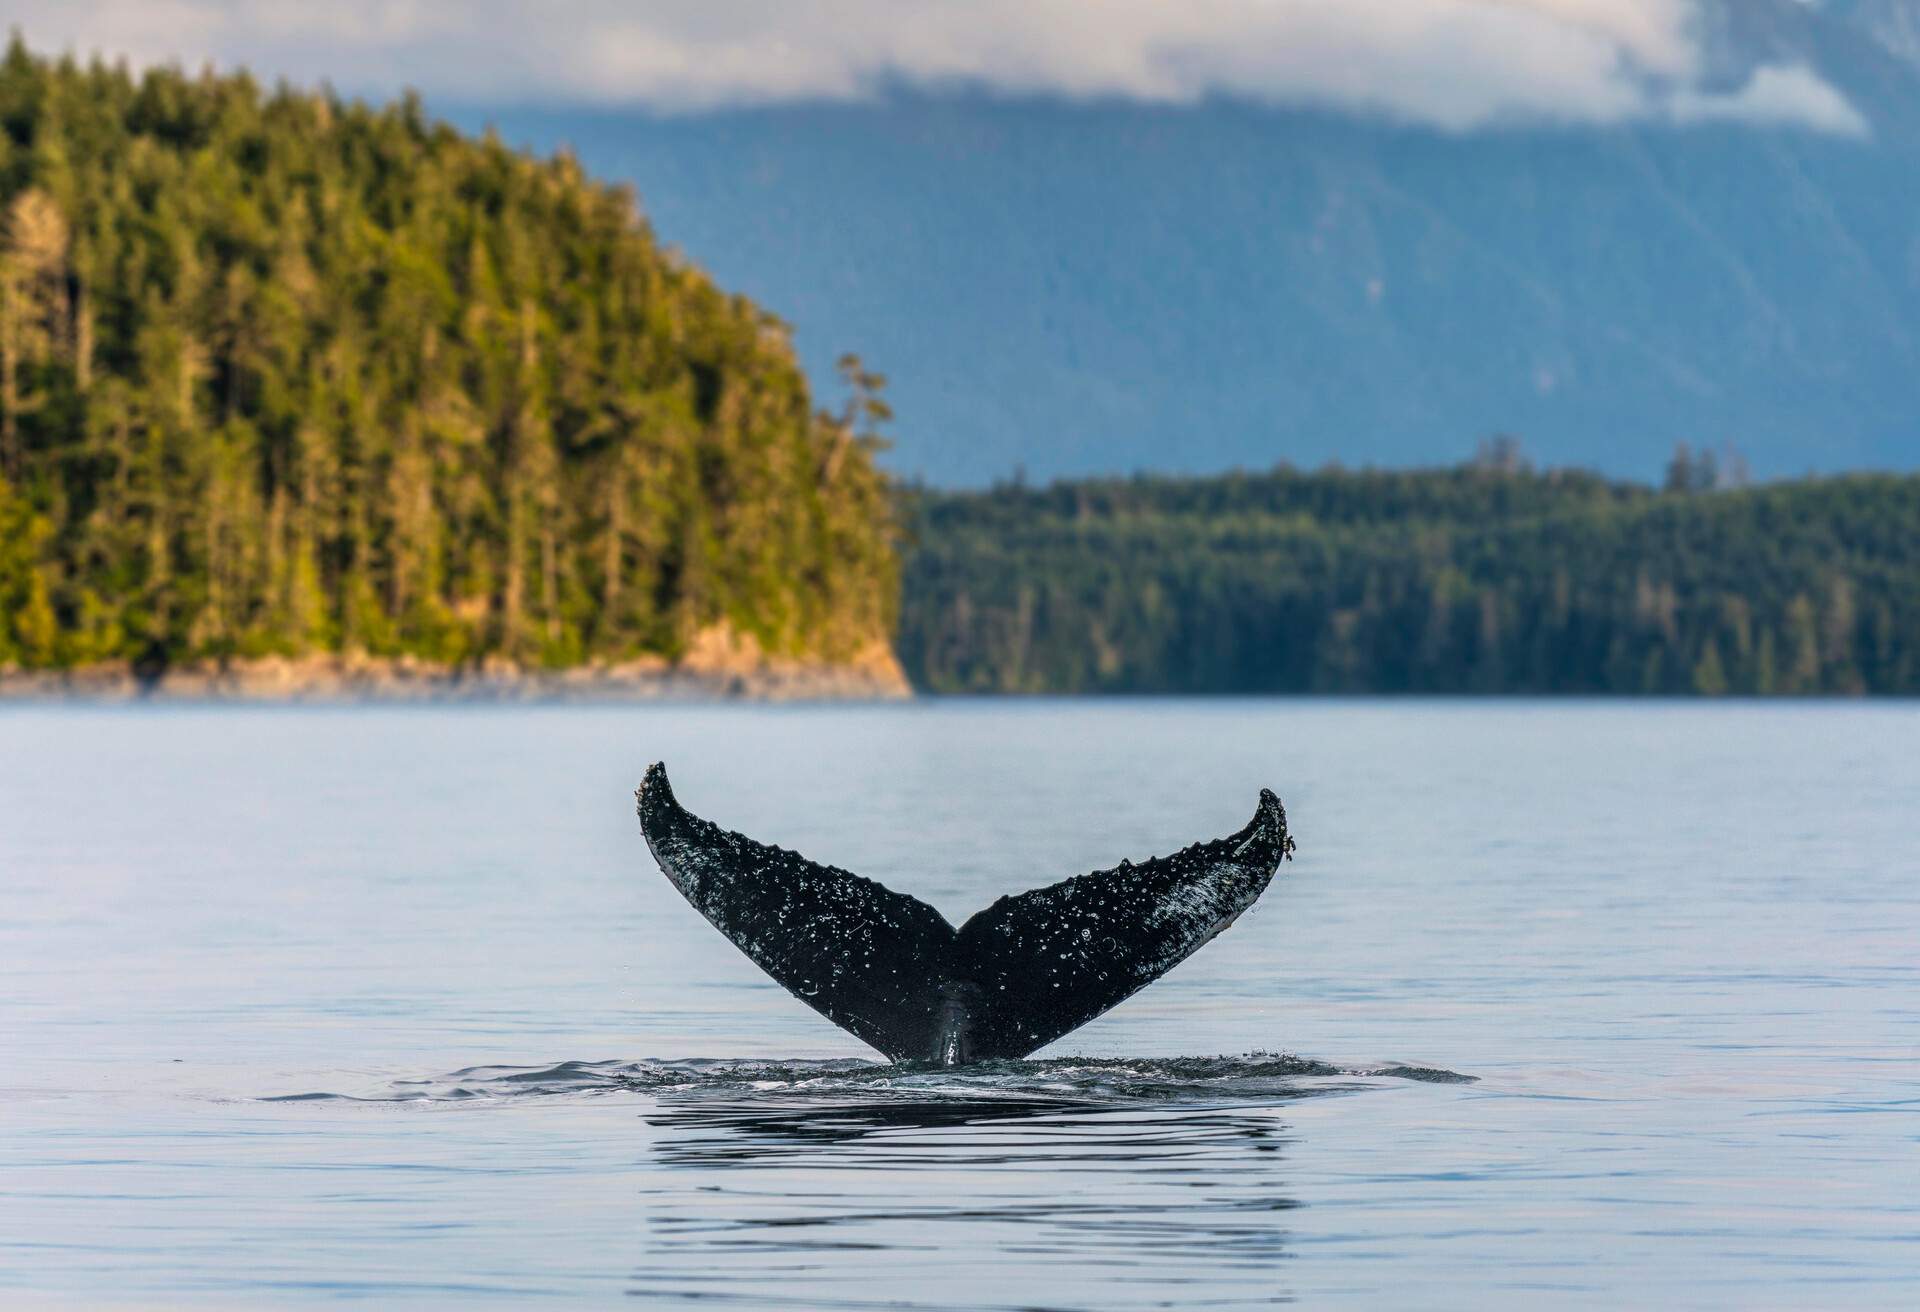 WHALE WATCHING CANADA